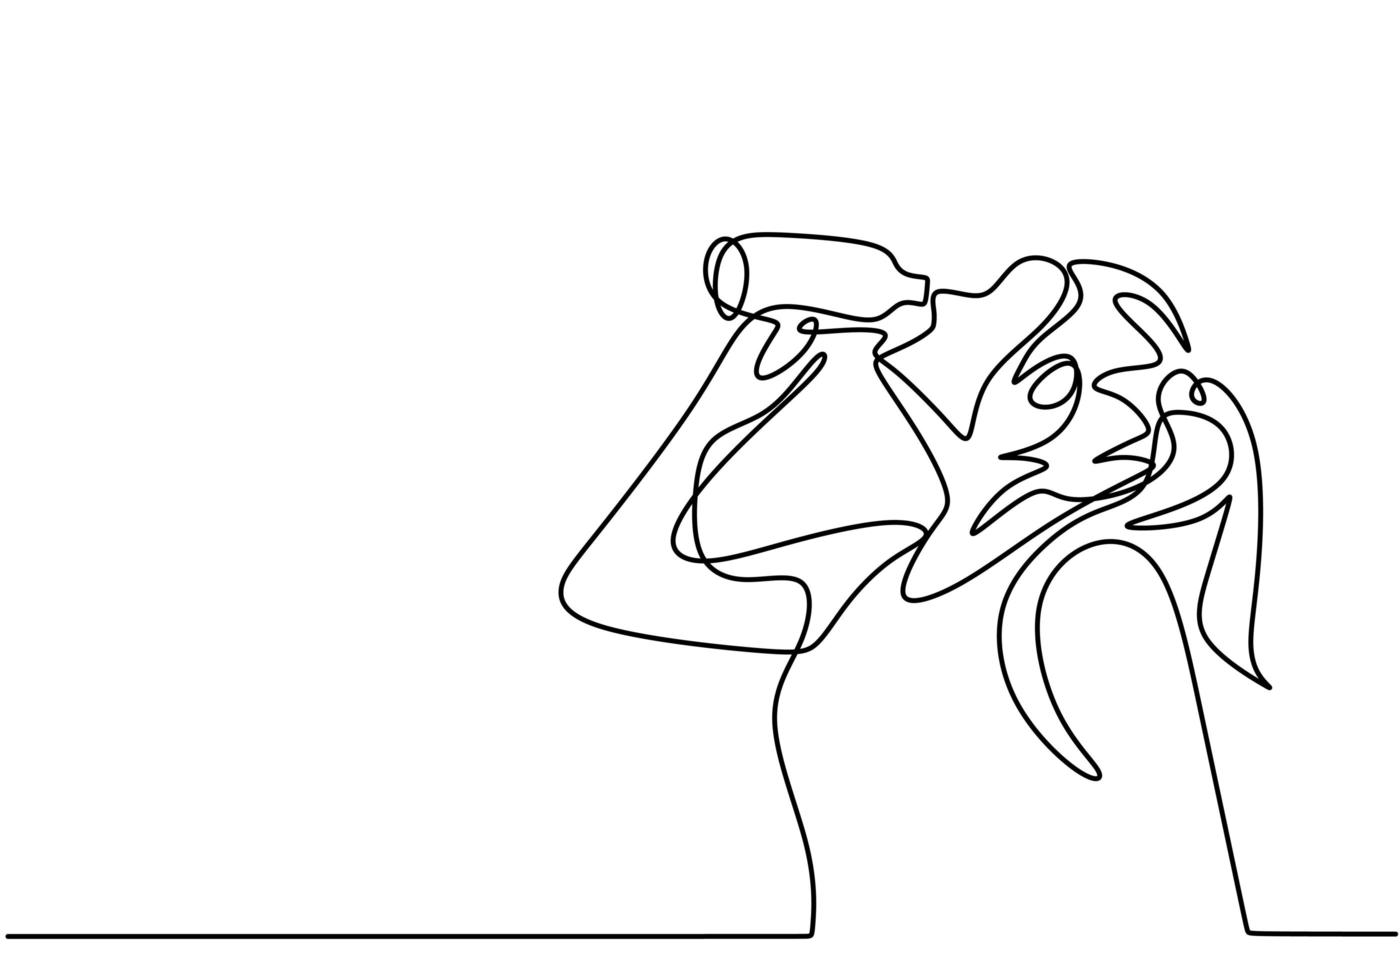 Continuous one line drawing, vector of young girl drinking water from bottle, woman feel fresh after sport exercise and jogging . Minimalism design with simplicity hand drawn.